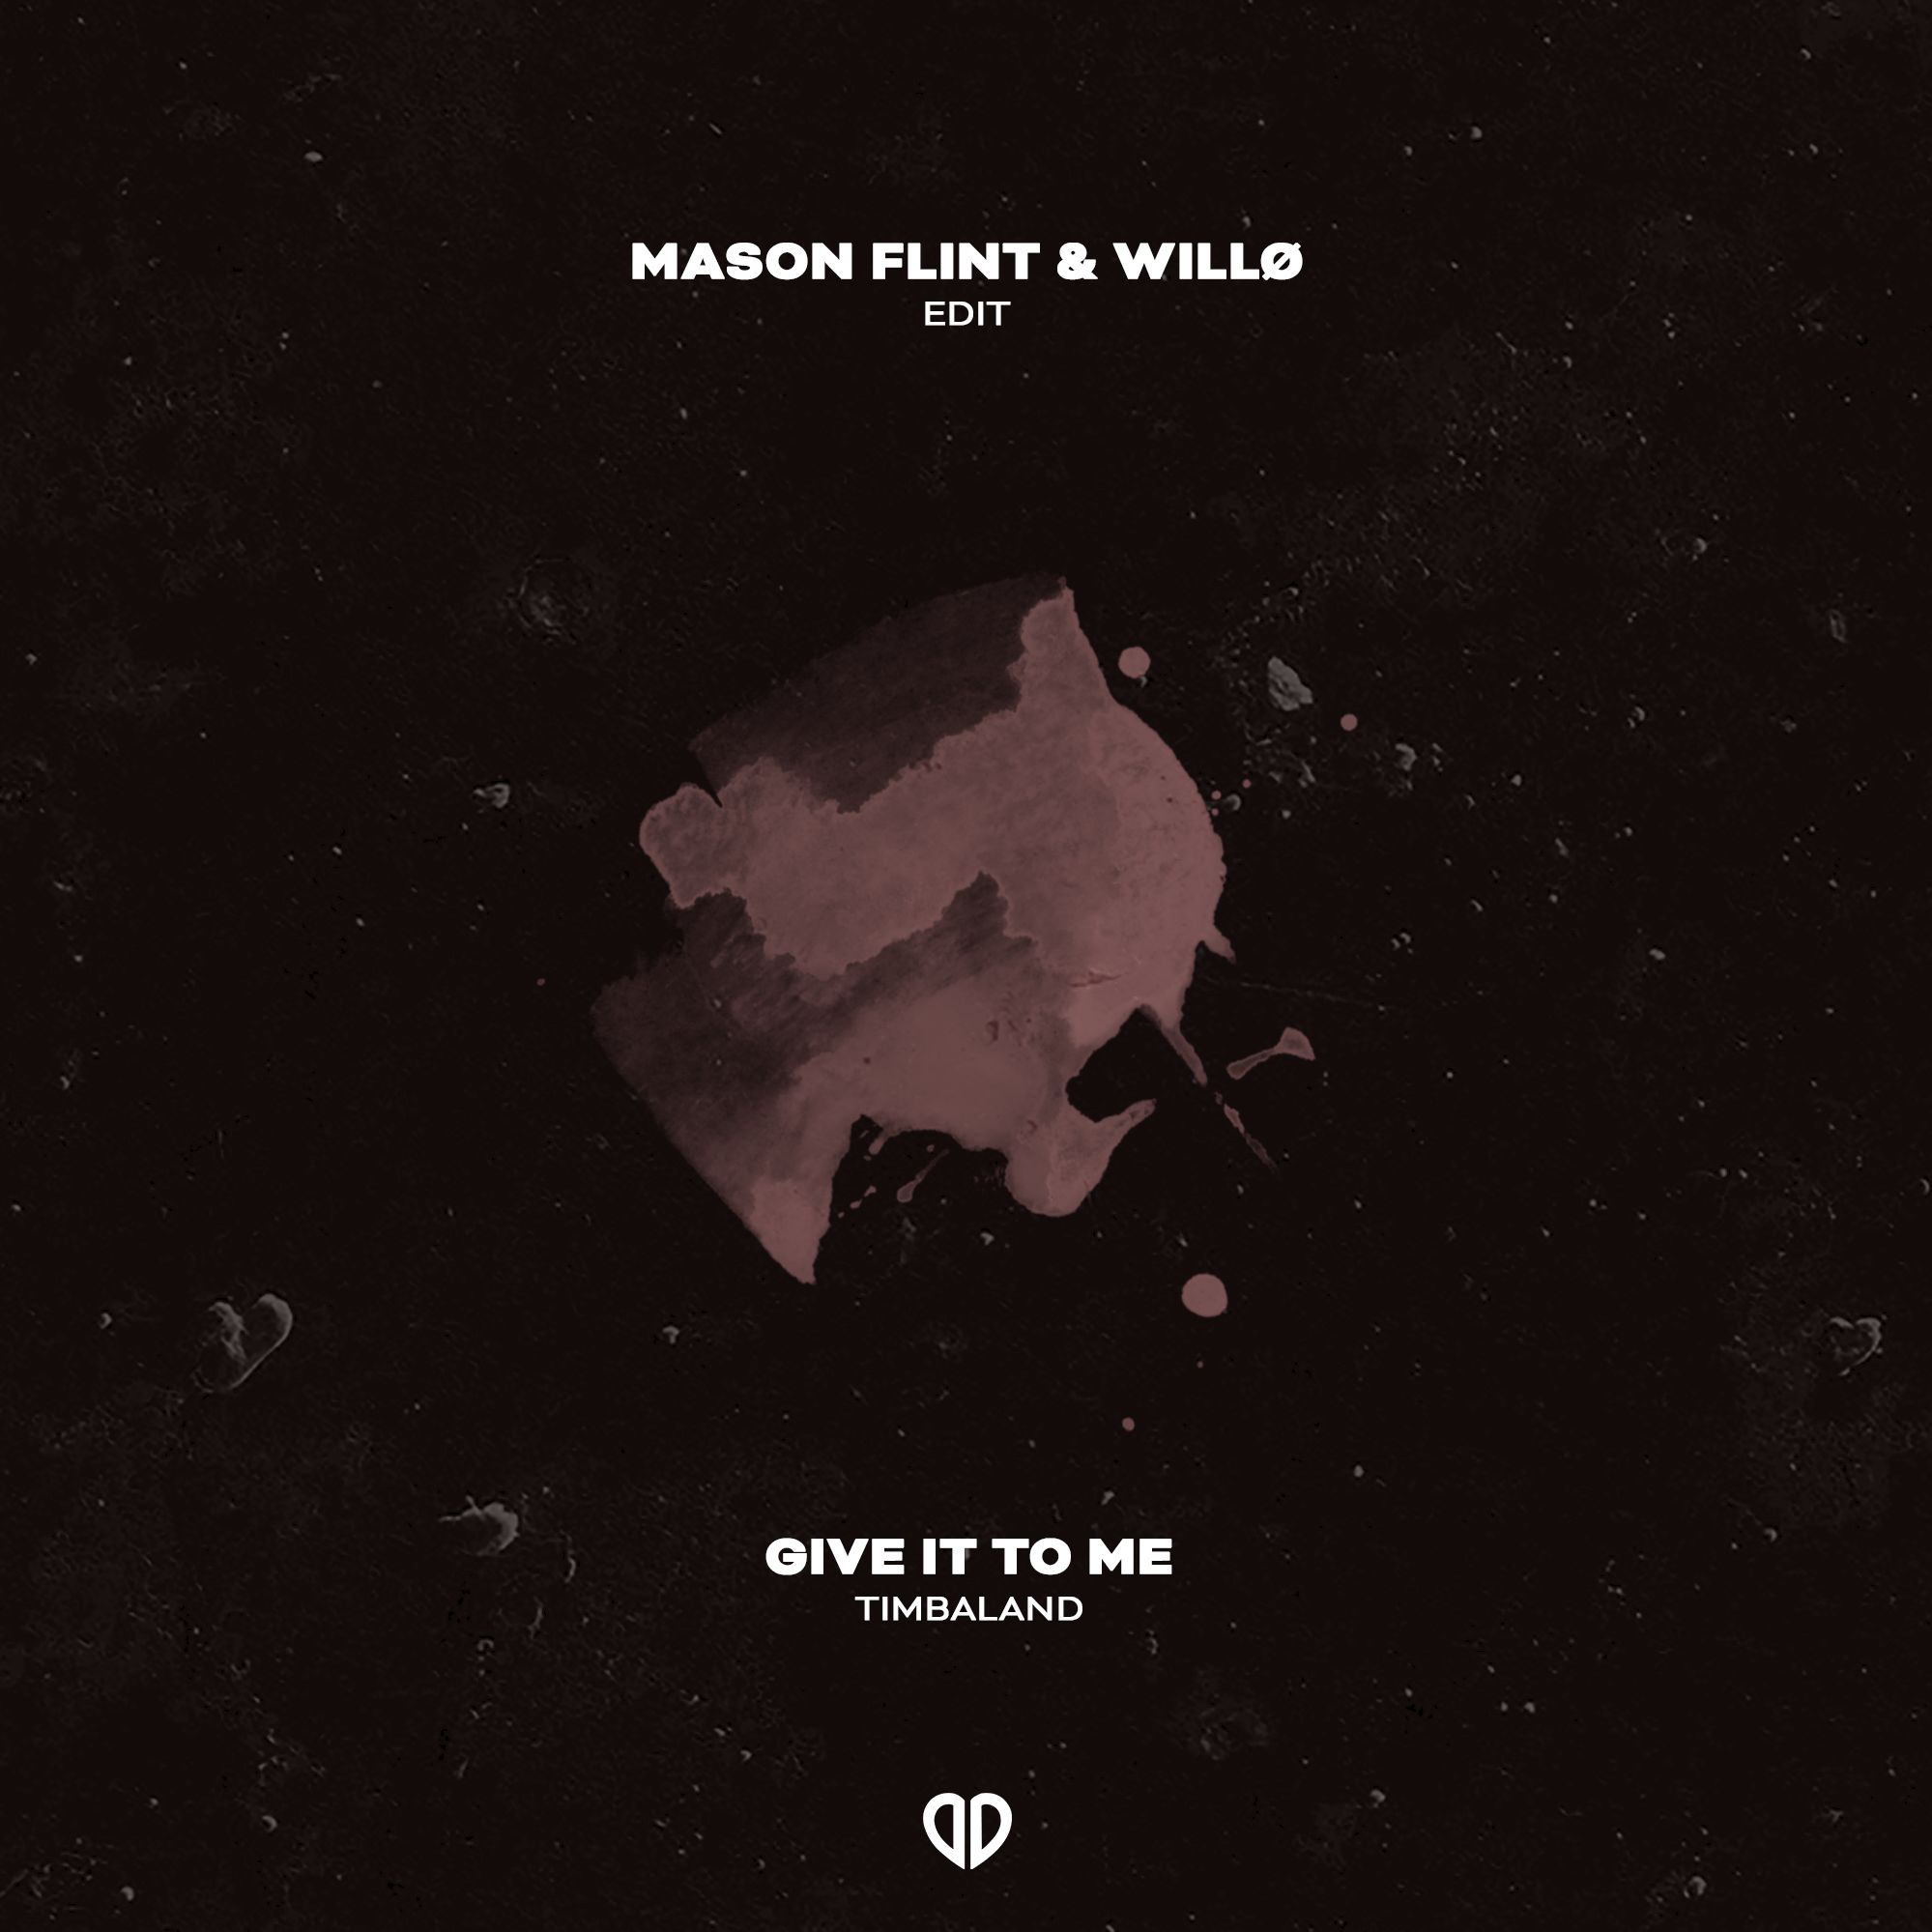 Hent Timbaland - Give It To Me (Mason Flint & Willo Edit) [DropUnited Exclusive]